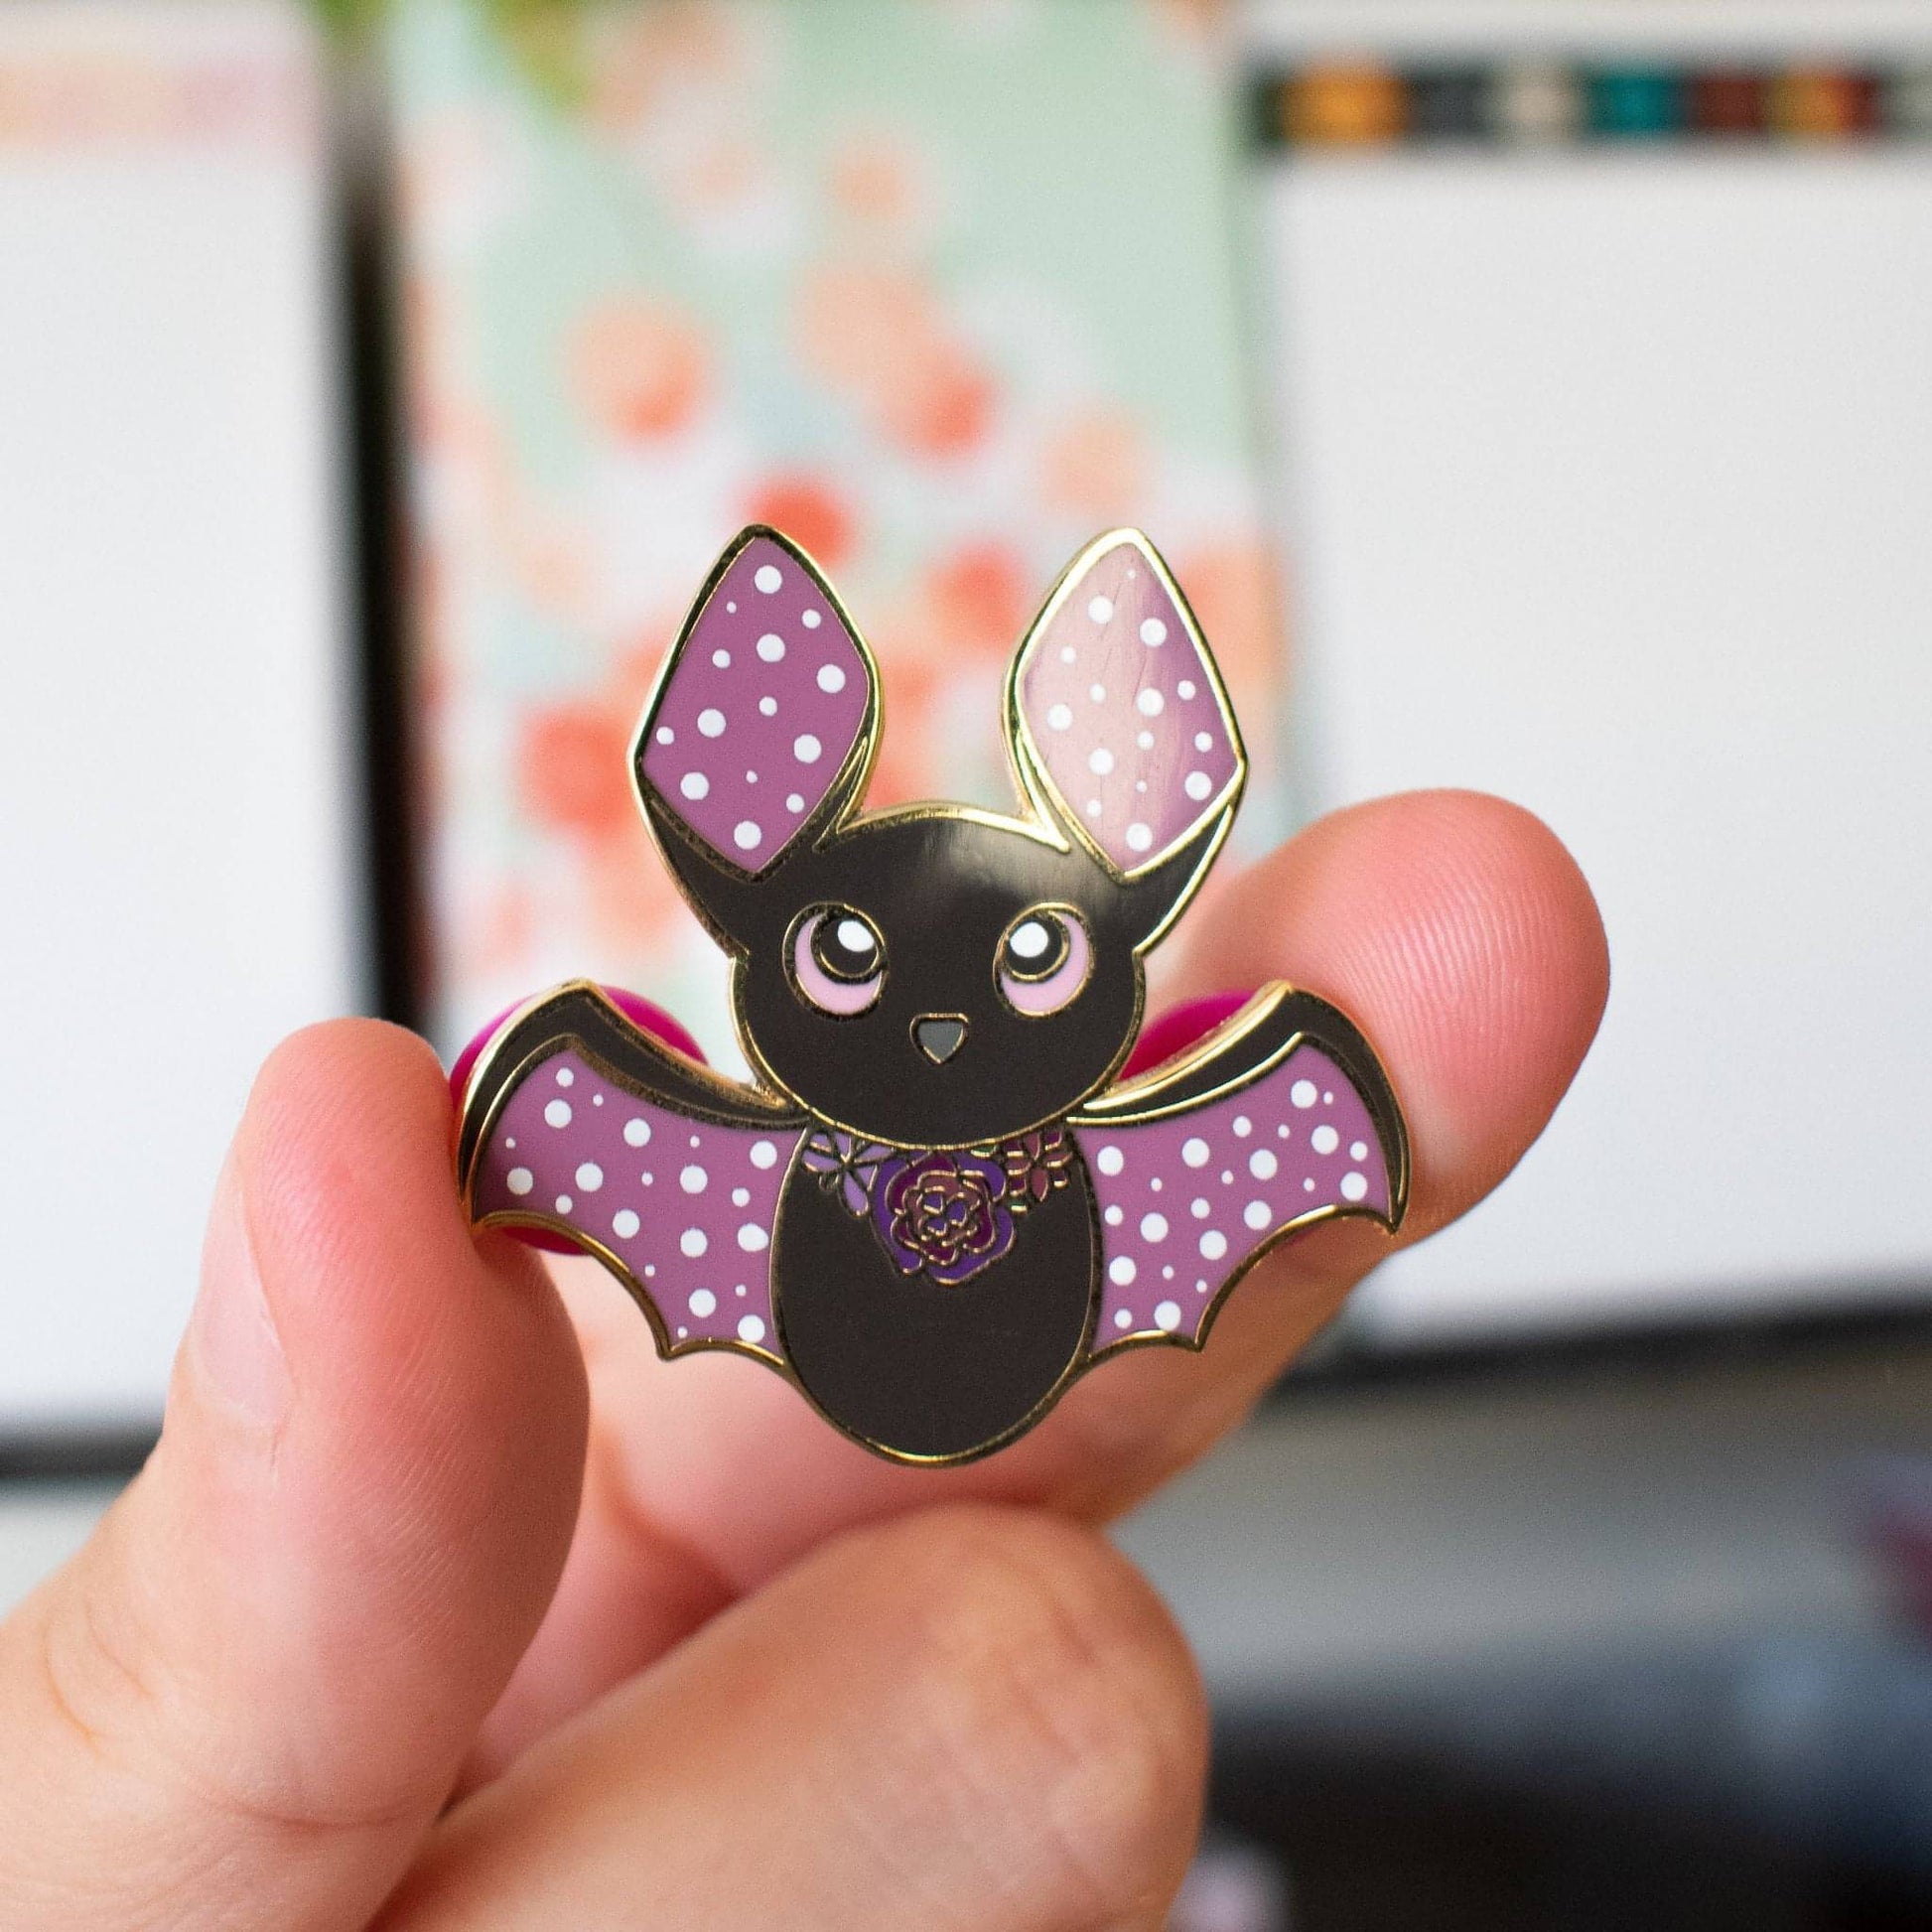 A black hard enamel bat pin with purple ears and wings. It has white dots on its ears and wings and a floral collar.